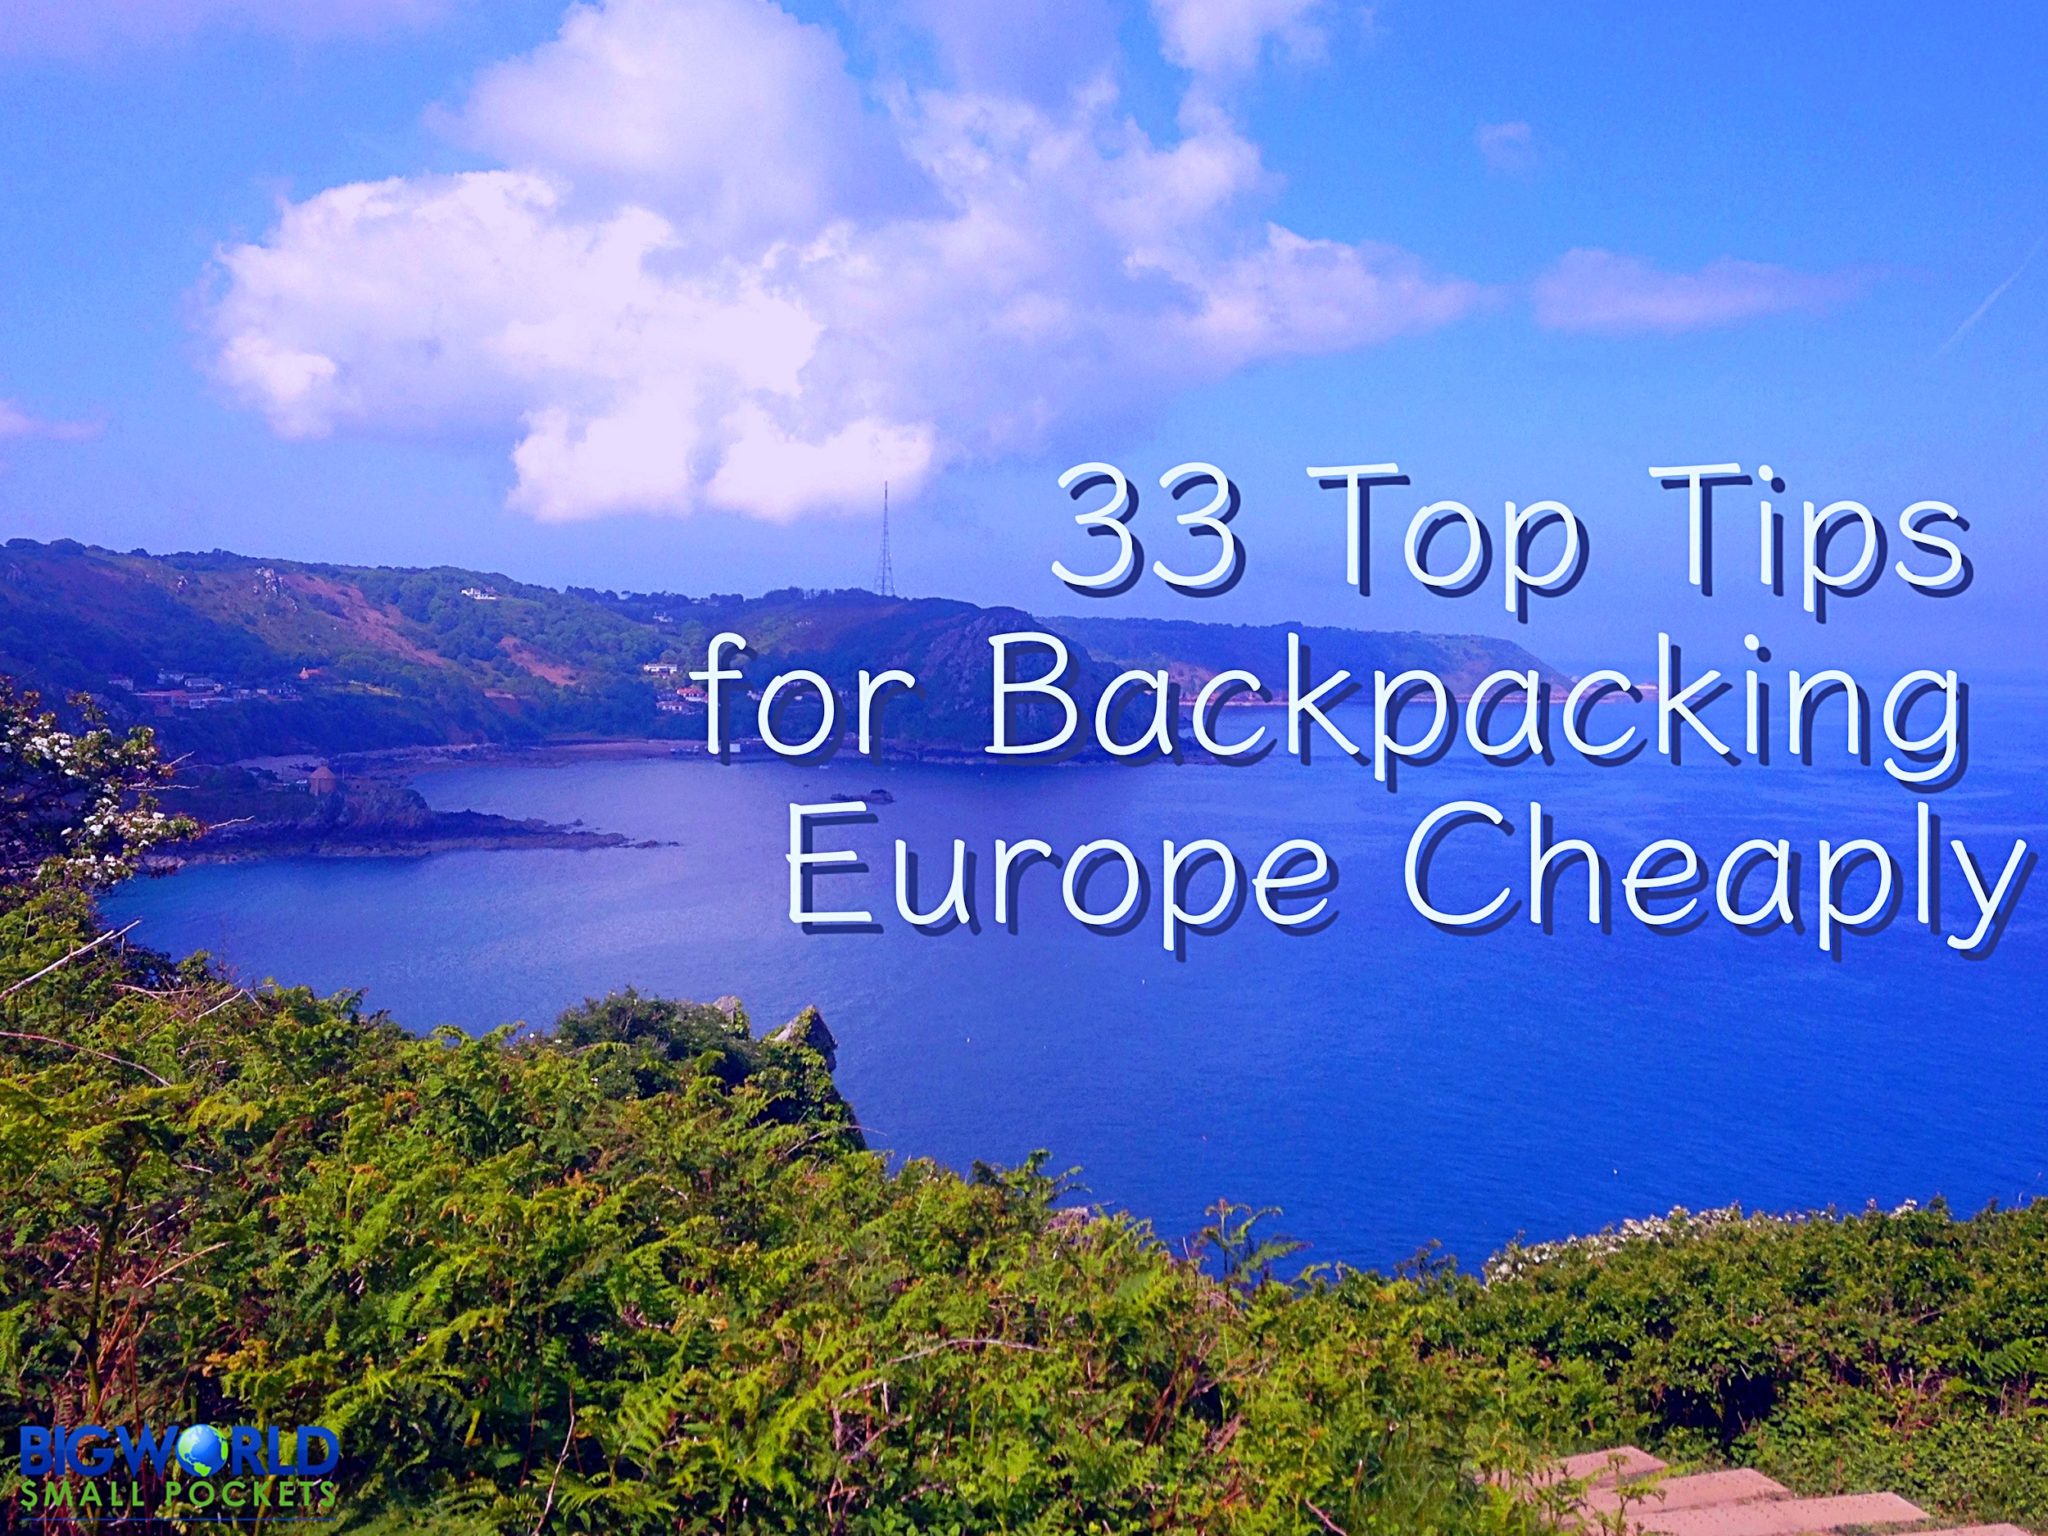 33 Top Tips for Backpacking Europe Cheaply - Big World Small Pockets